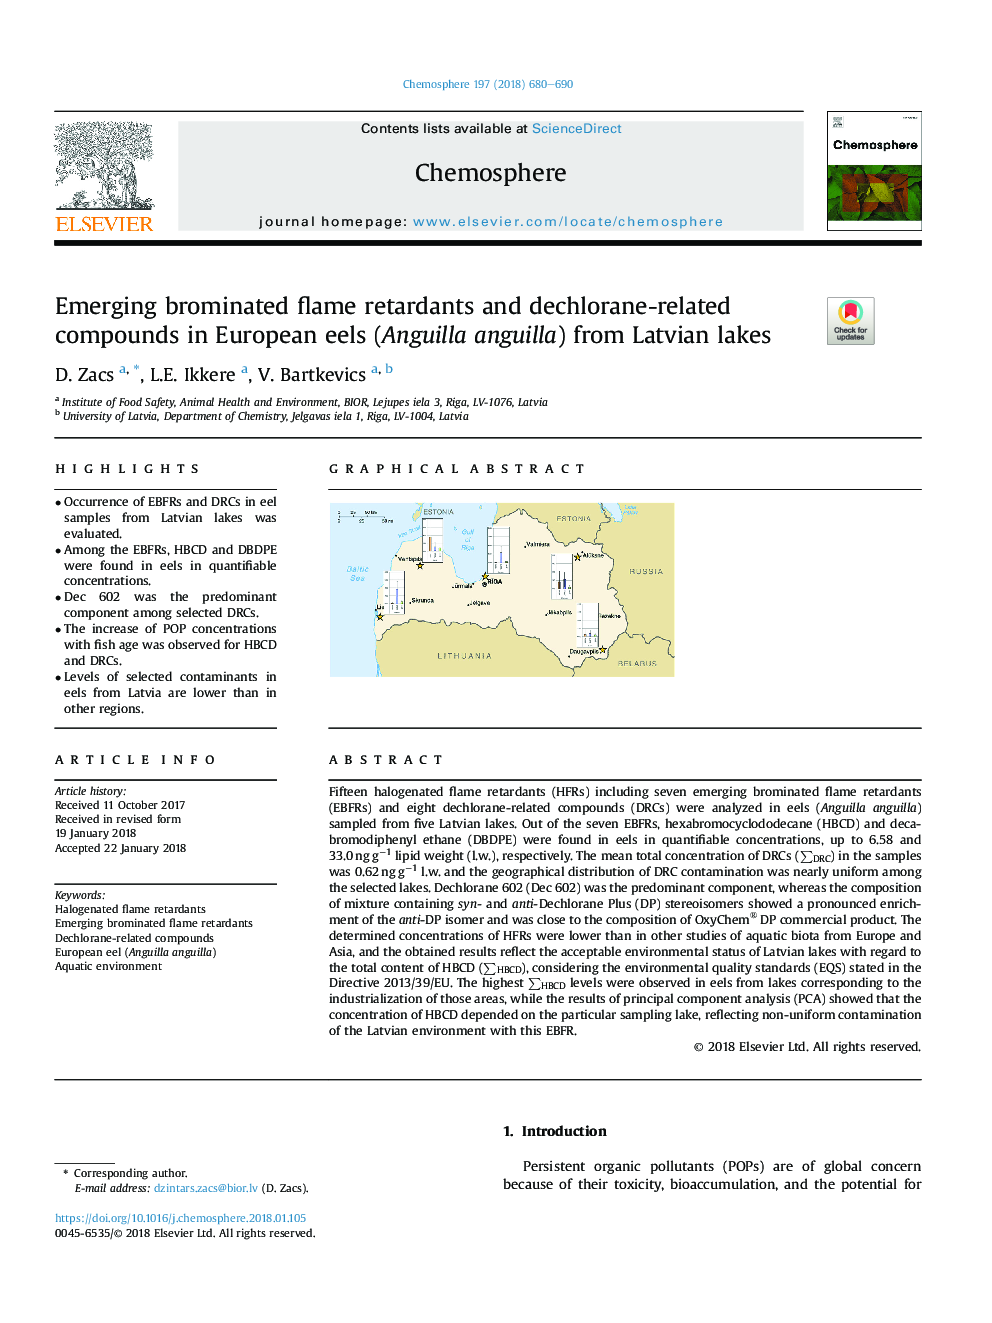 Emerging brominated flame retardants and dechlorane-related compounds in European eels (Anguilla anguilla) from Latvian lakes